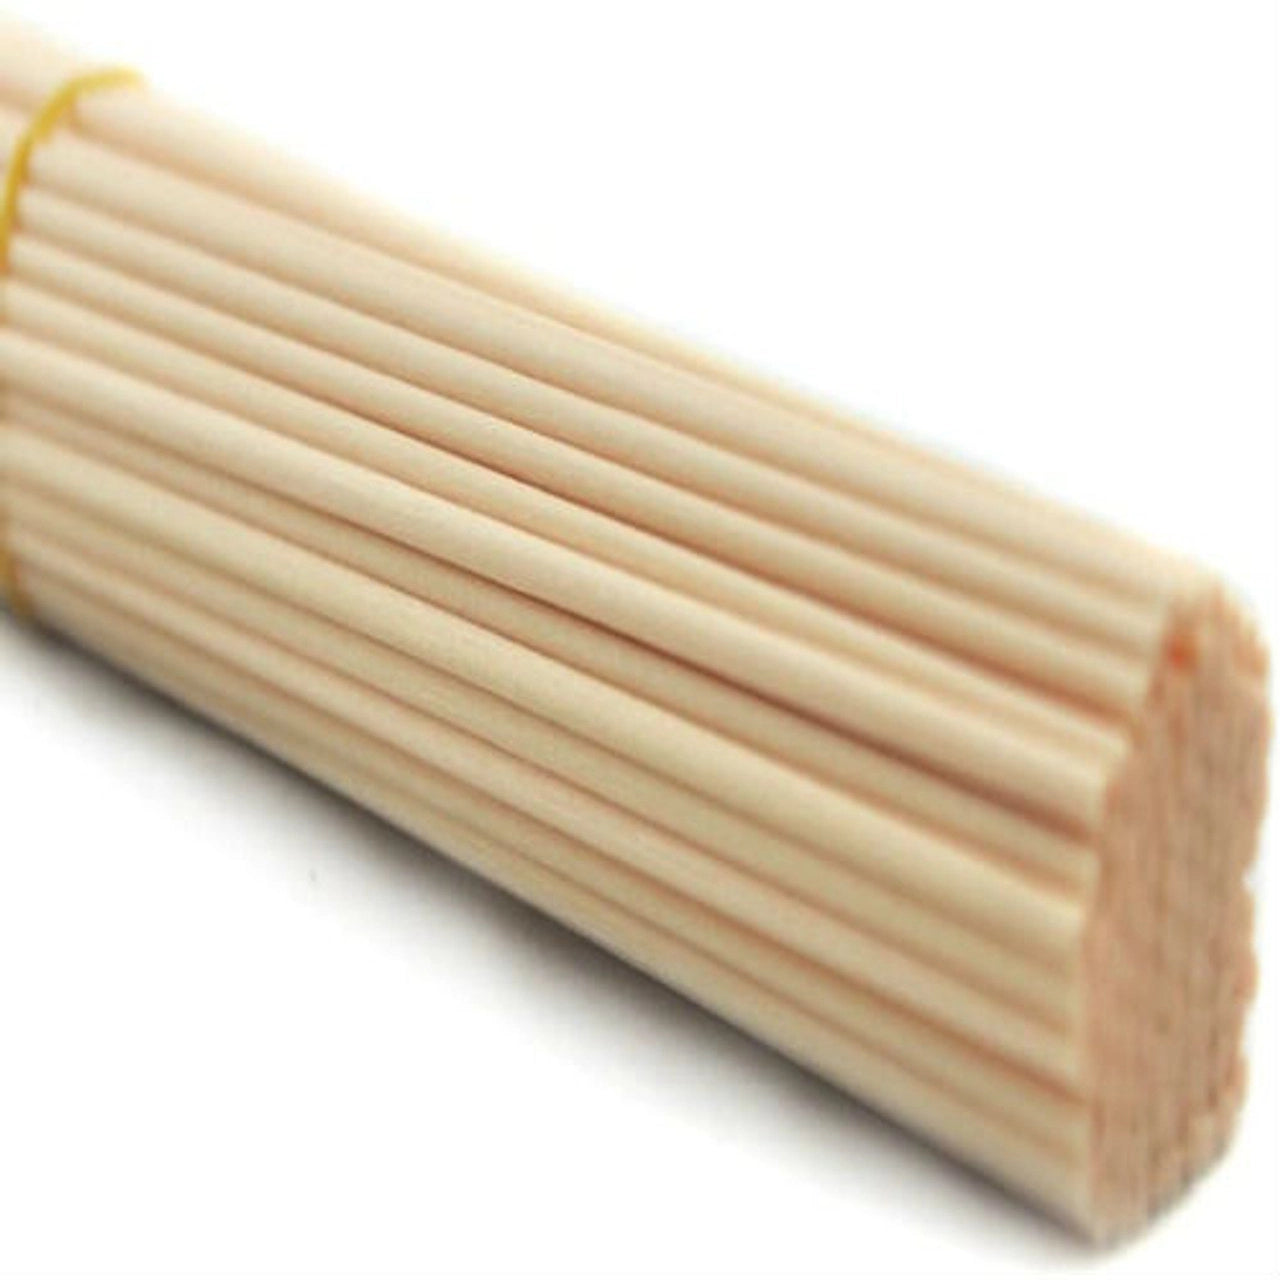 Natural Fibre Reeds 3mm x 175mm (Recommended for 50ml Diffuser Bottle)